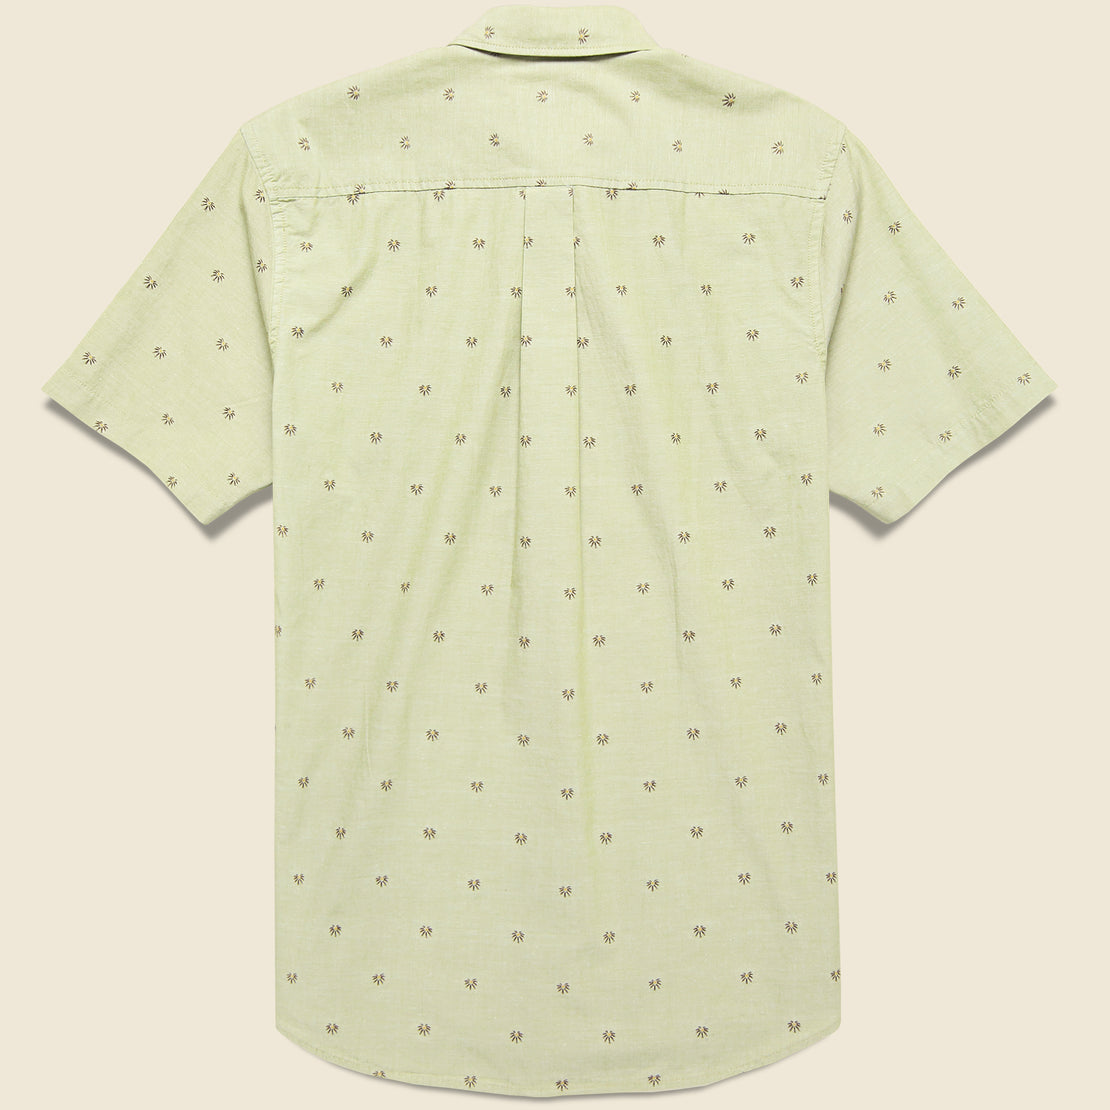 Agave Shirt - Pimento - Katin - STAG Provisions - Tops - S/S Woven - Dot